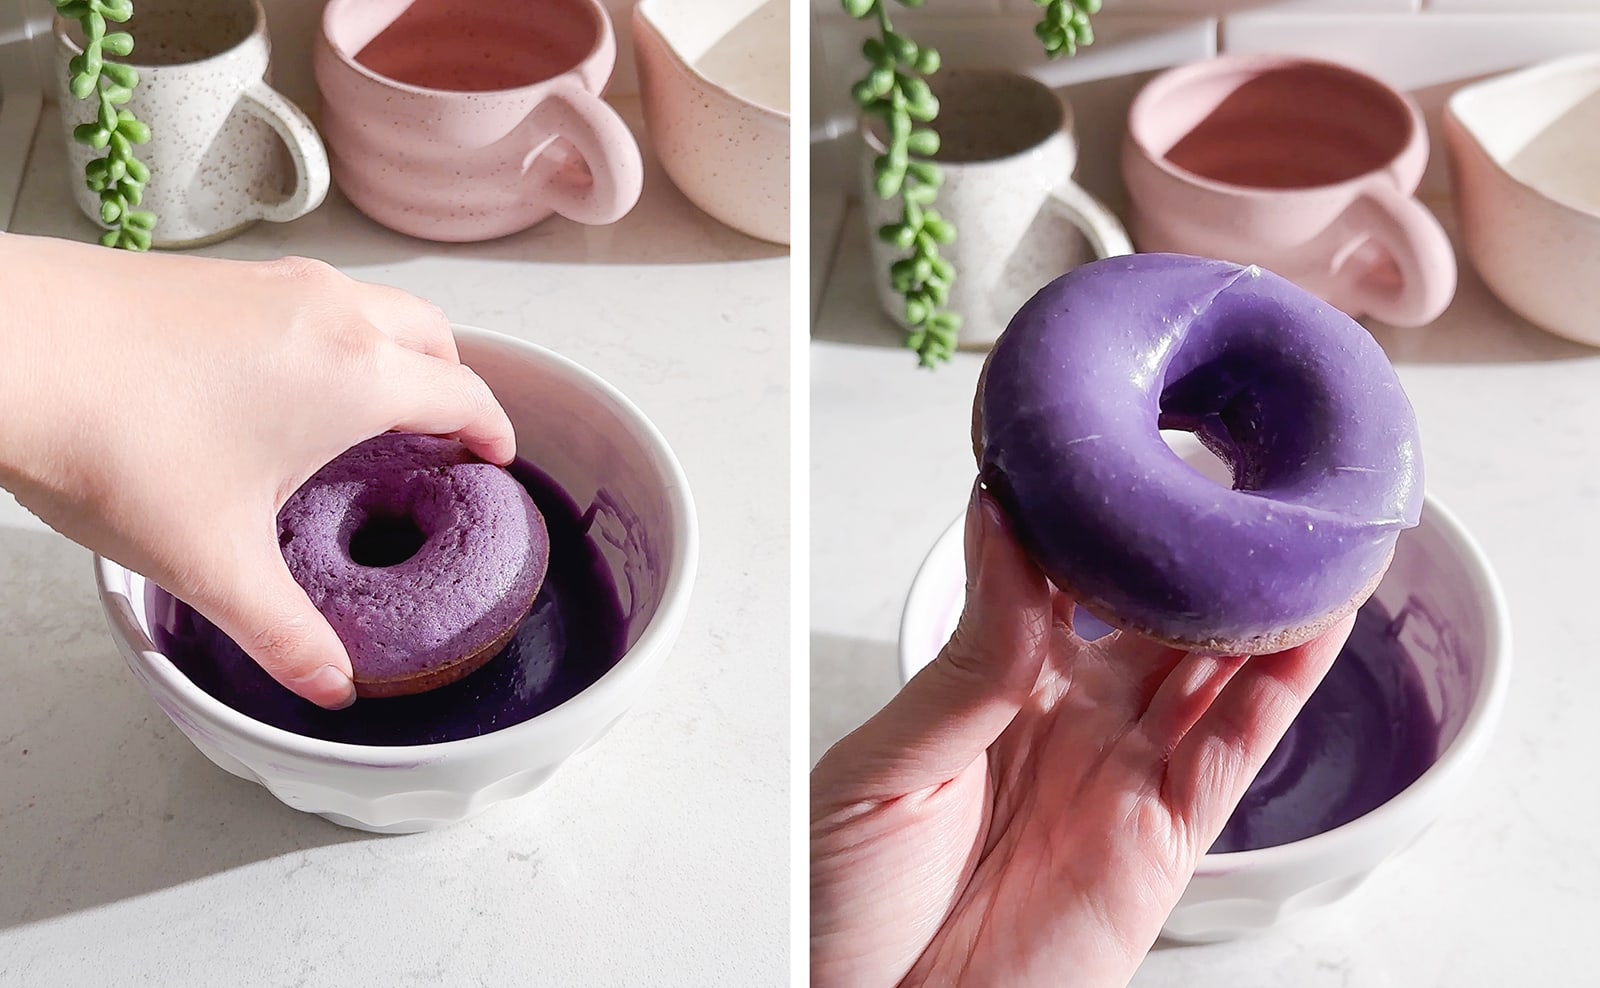 Left to right: hand dipping donut into bowl of glaze, hand holding donut glazed in purple ganache.